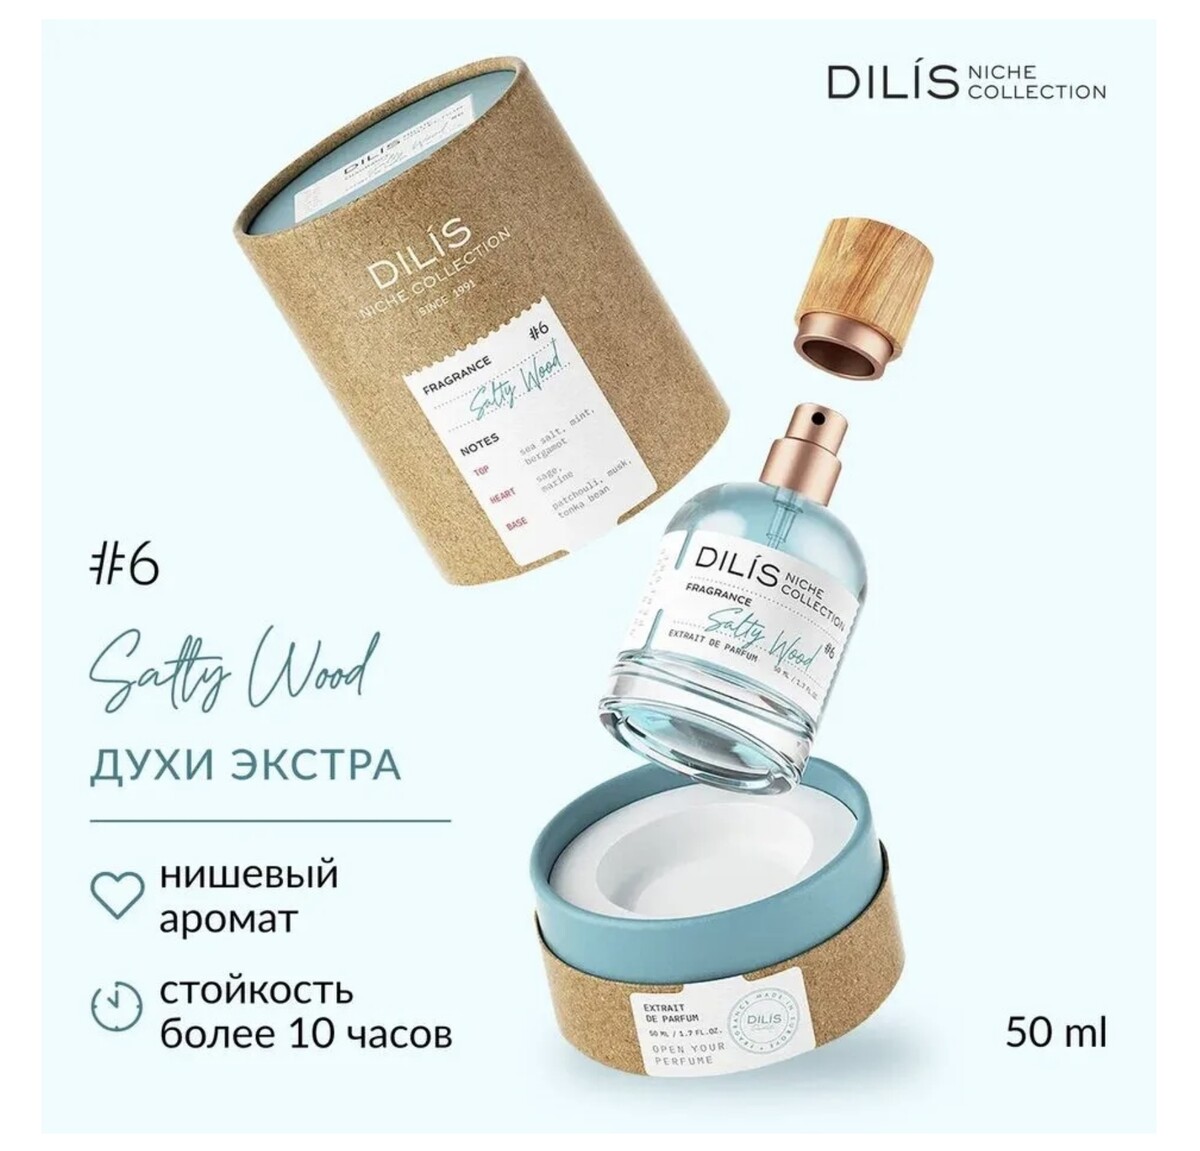 Niche collection духи salty wood 50мл духи женские dilis niche collection be